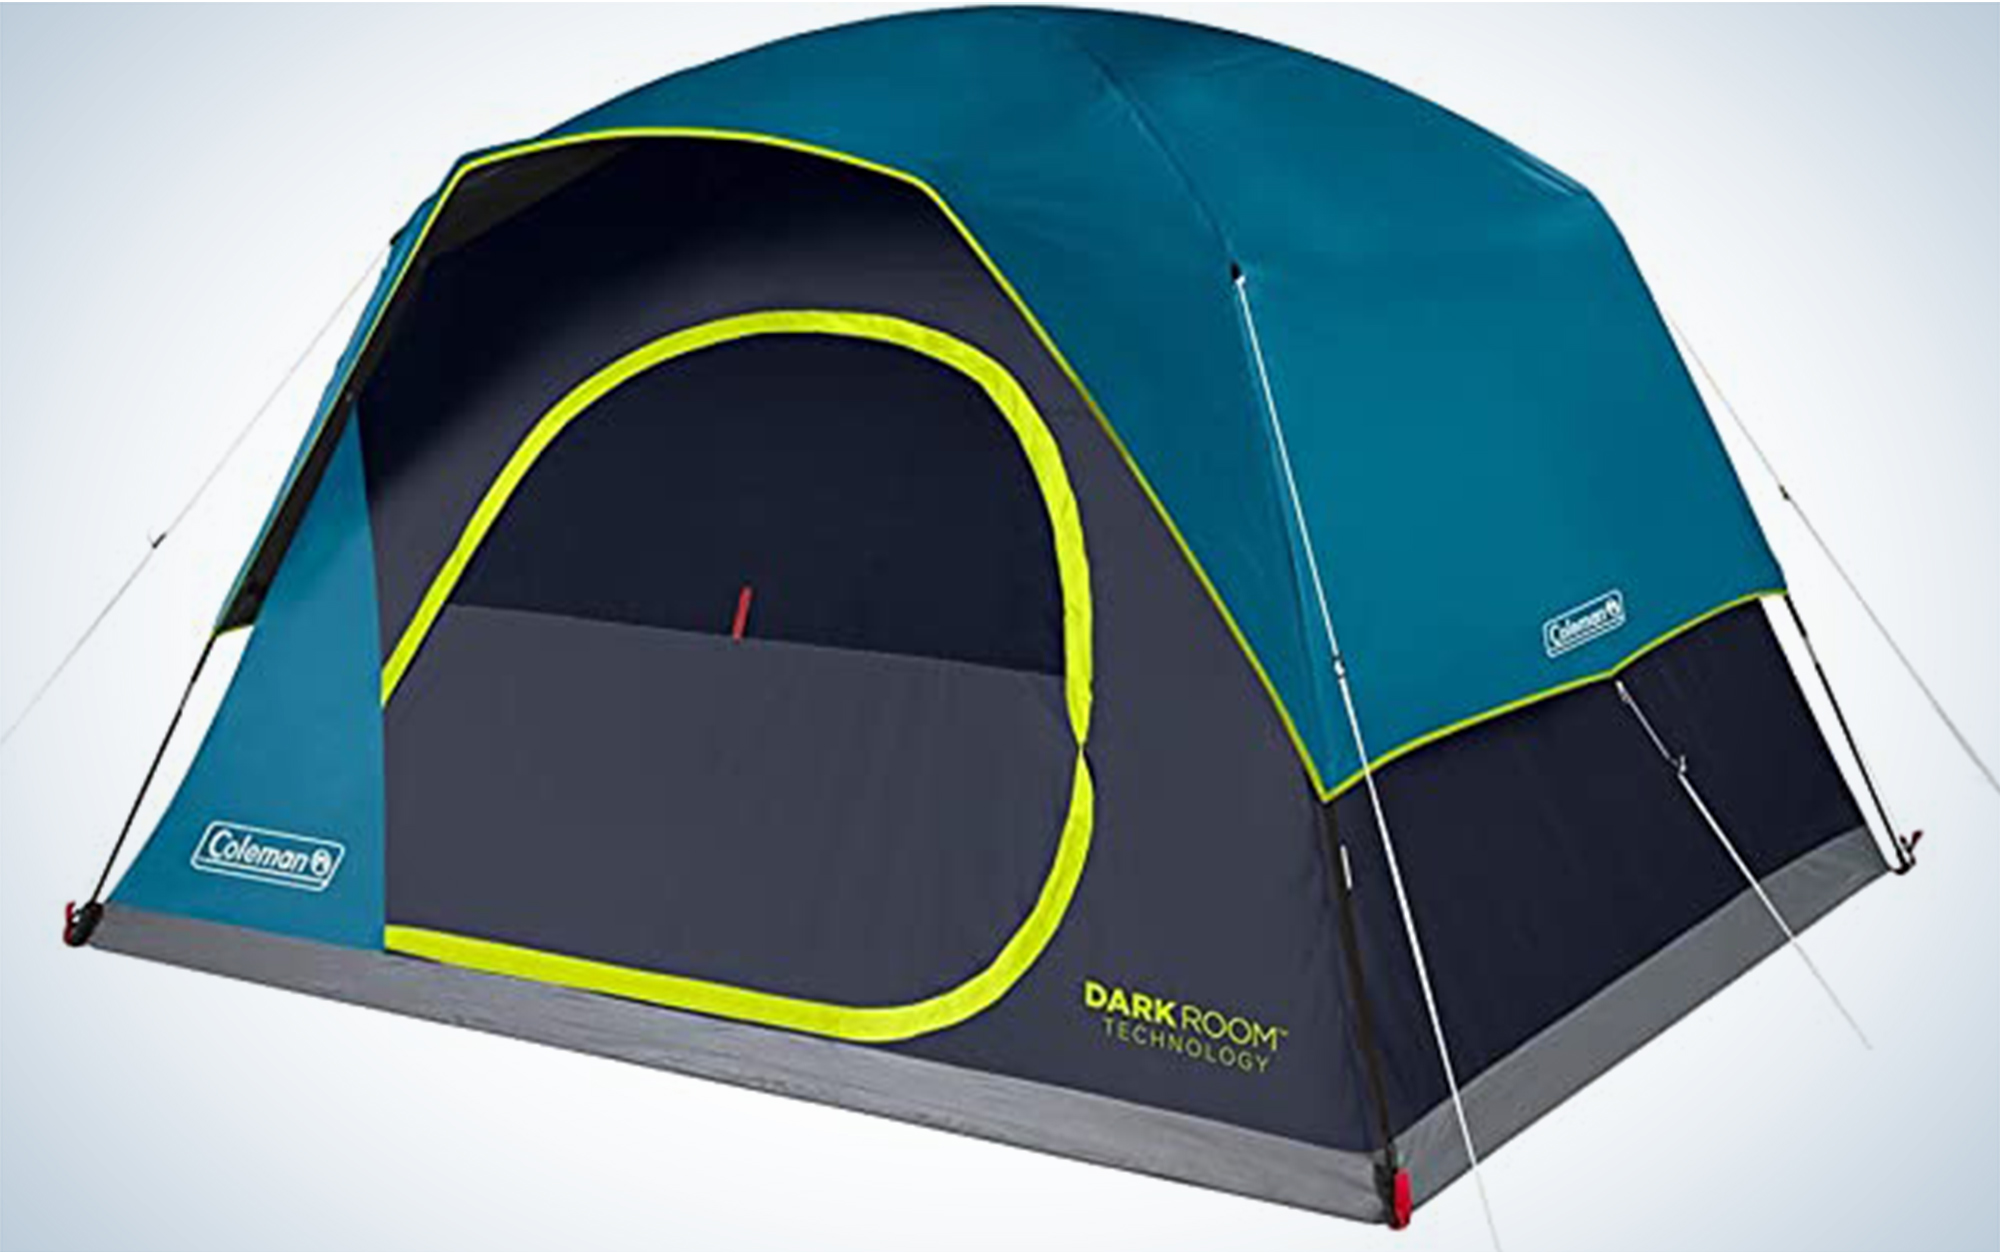 The Coleman Dark Room SkydomeÂ is one of the best camping tents.